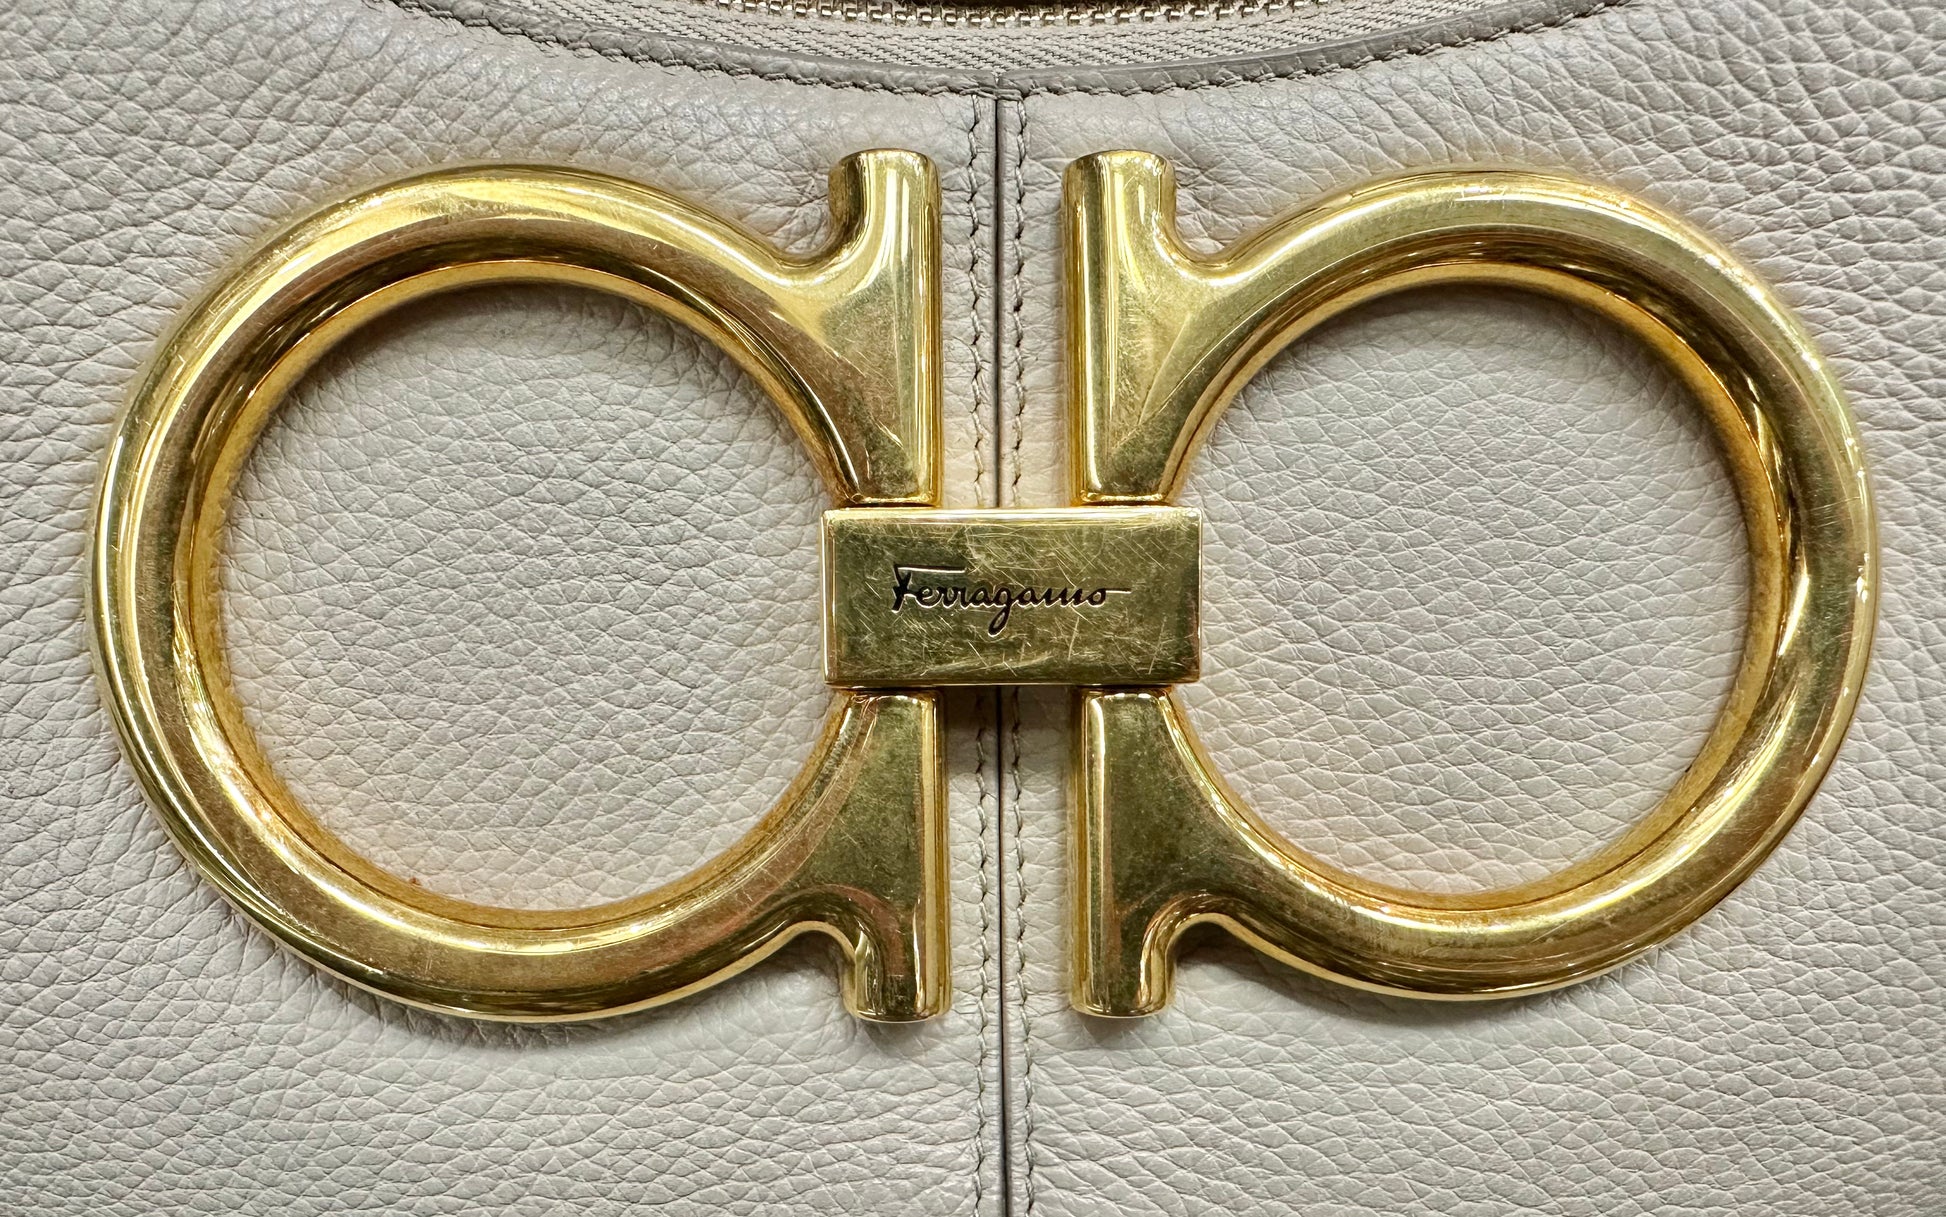 Close up photo of Ferragamo logo on front in gold with scratches on hardware